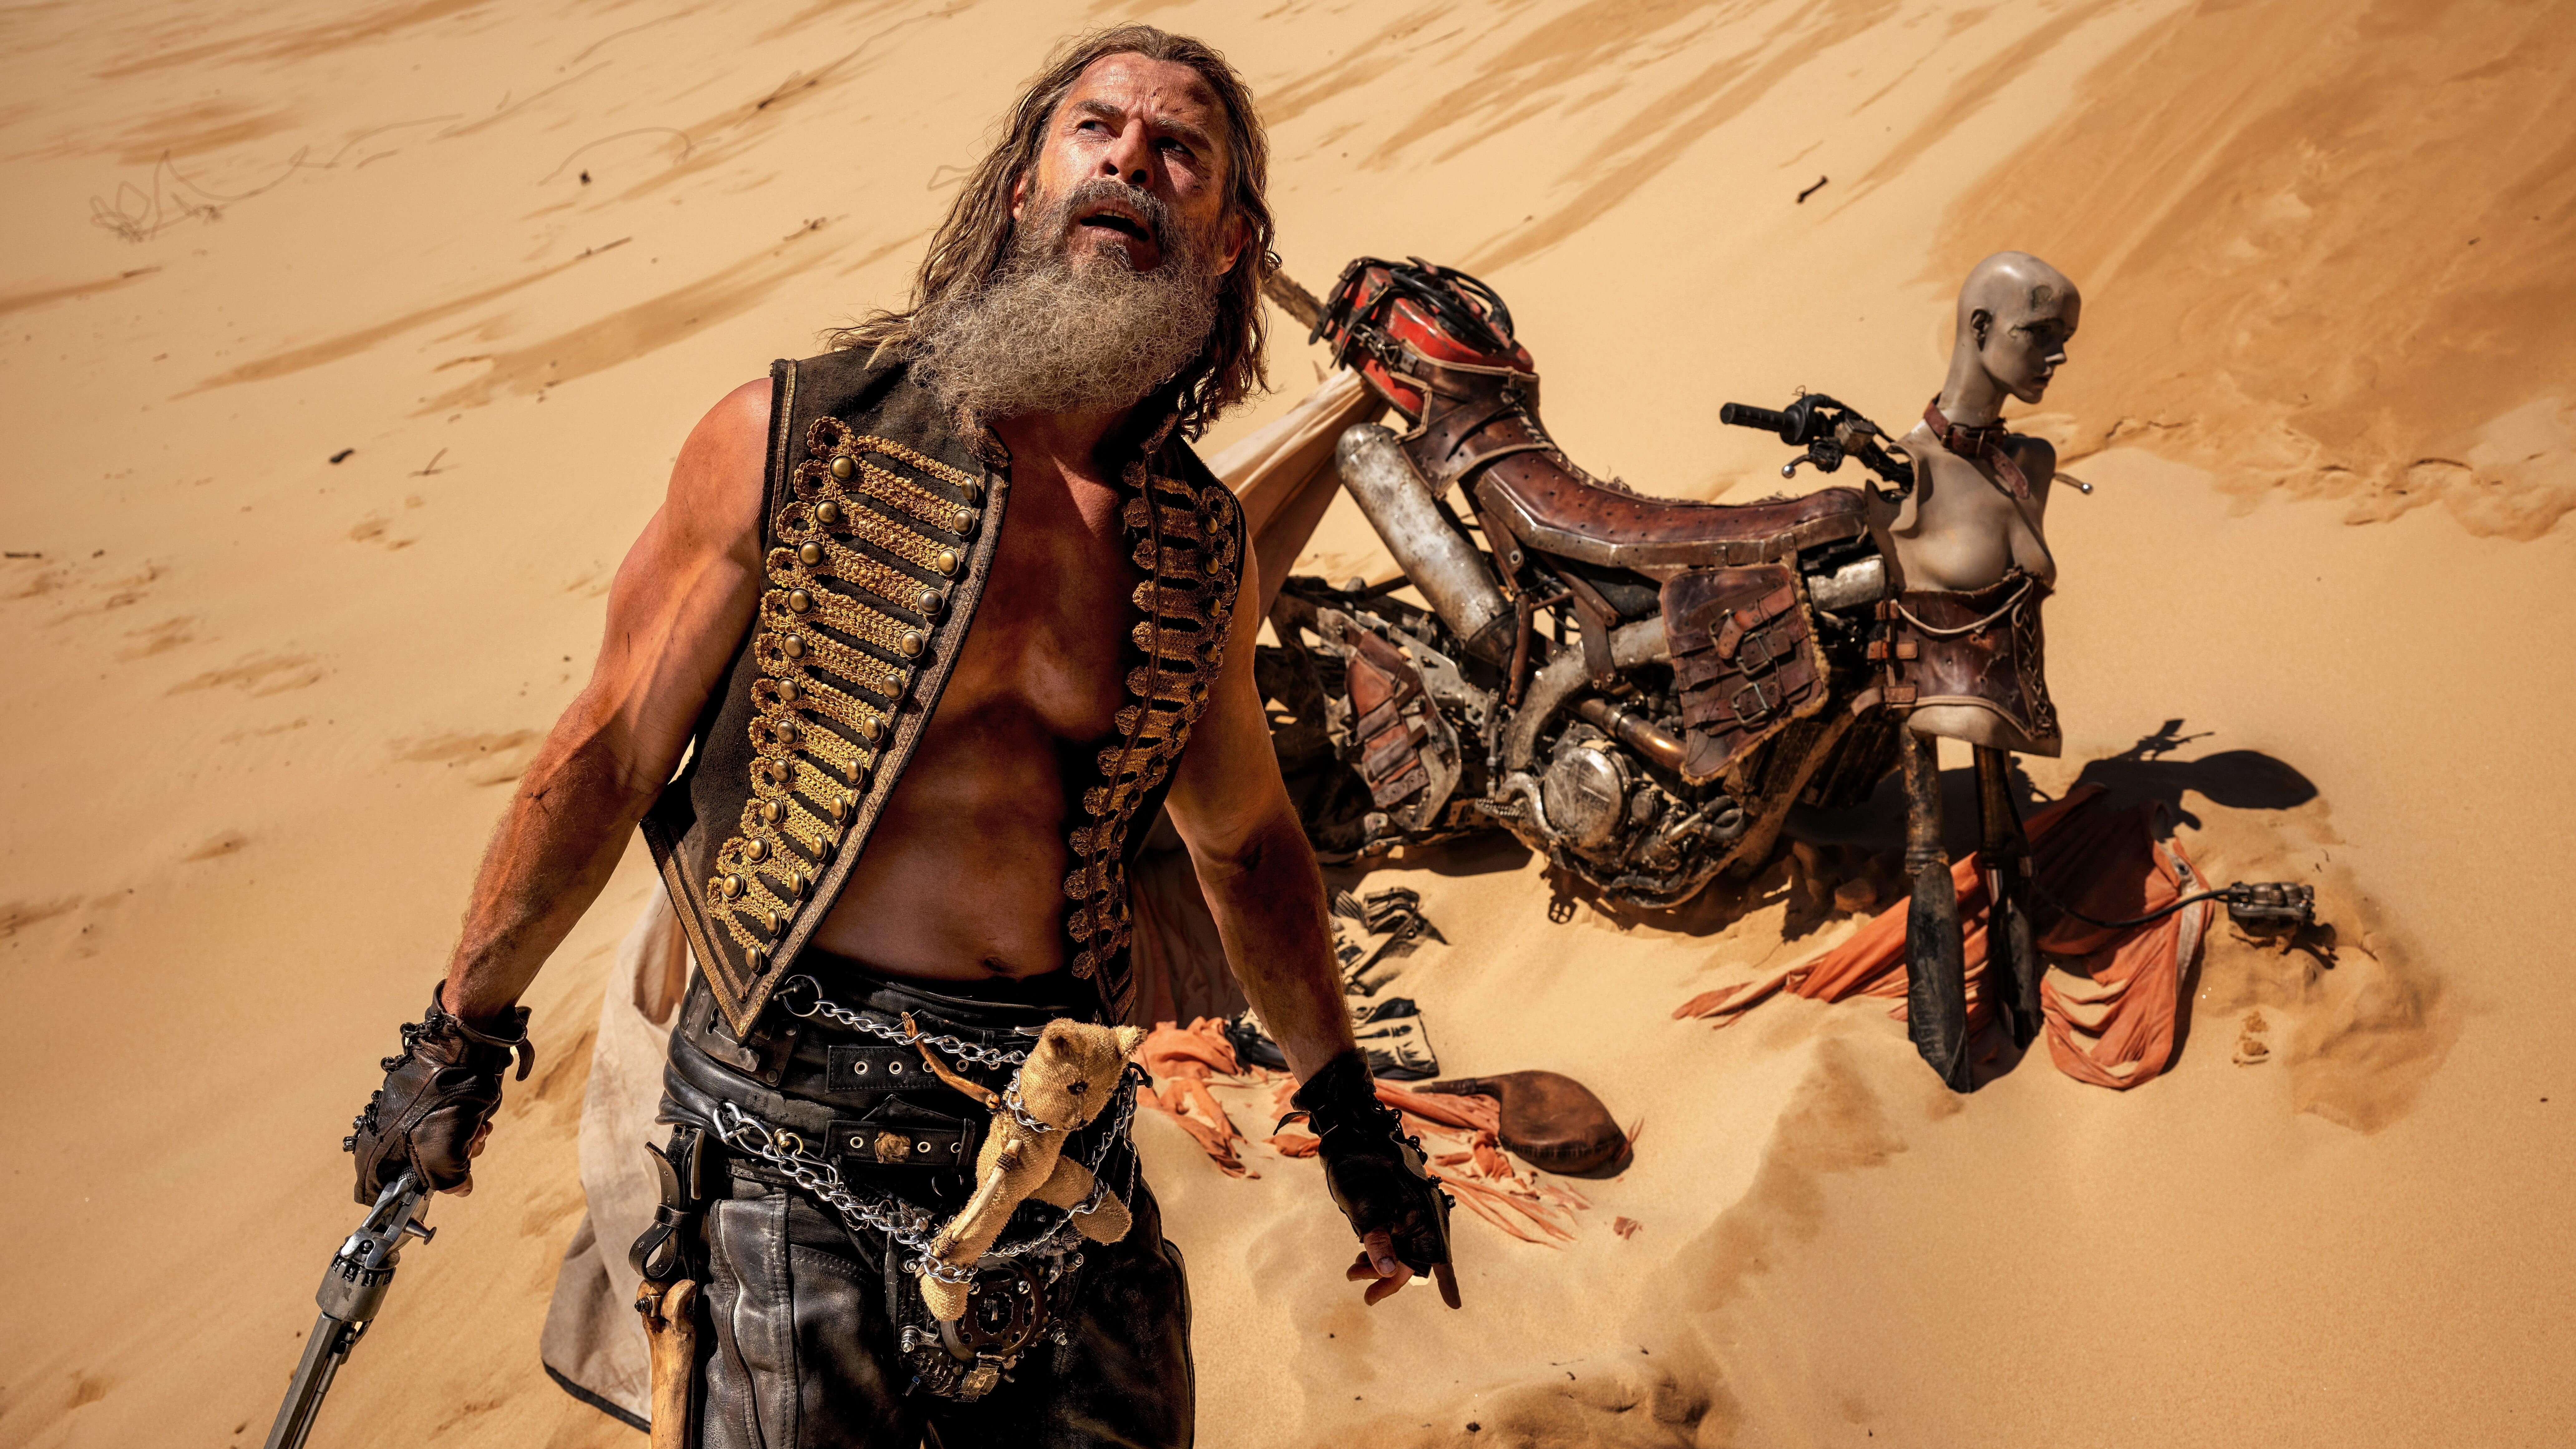 Chris Hemsworth was glad to “dirty it up” and leave his superhero persona behind for Furiosa